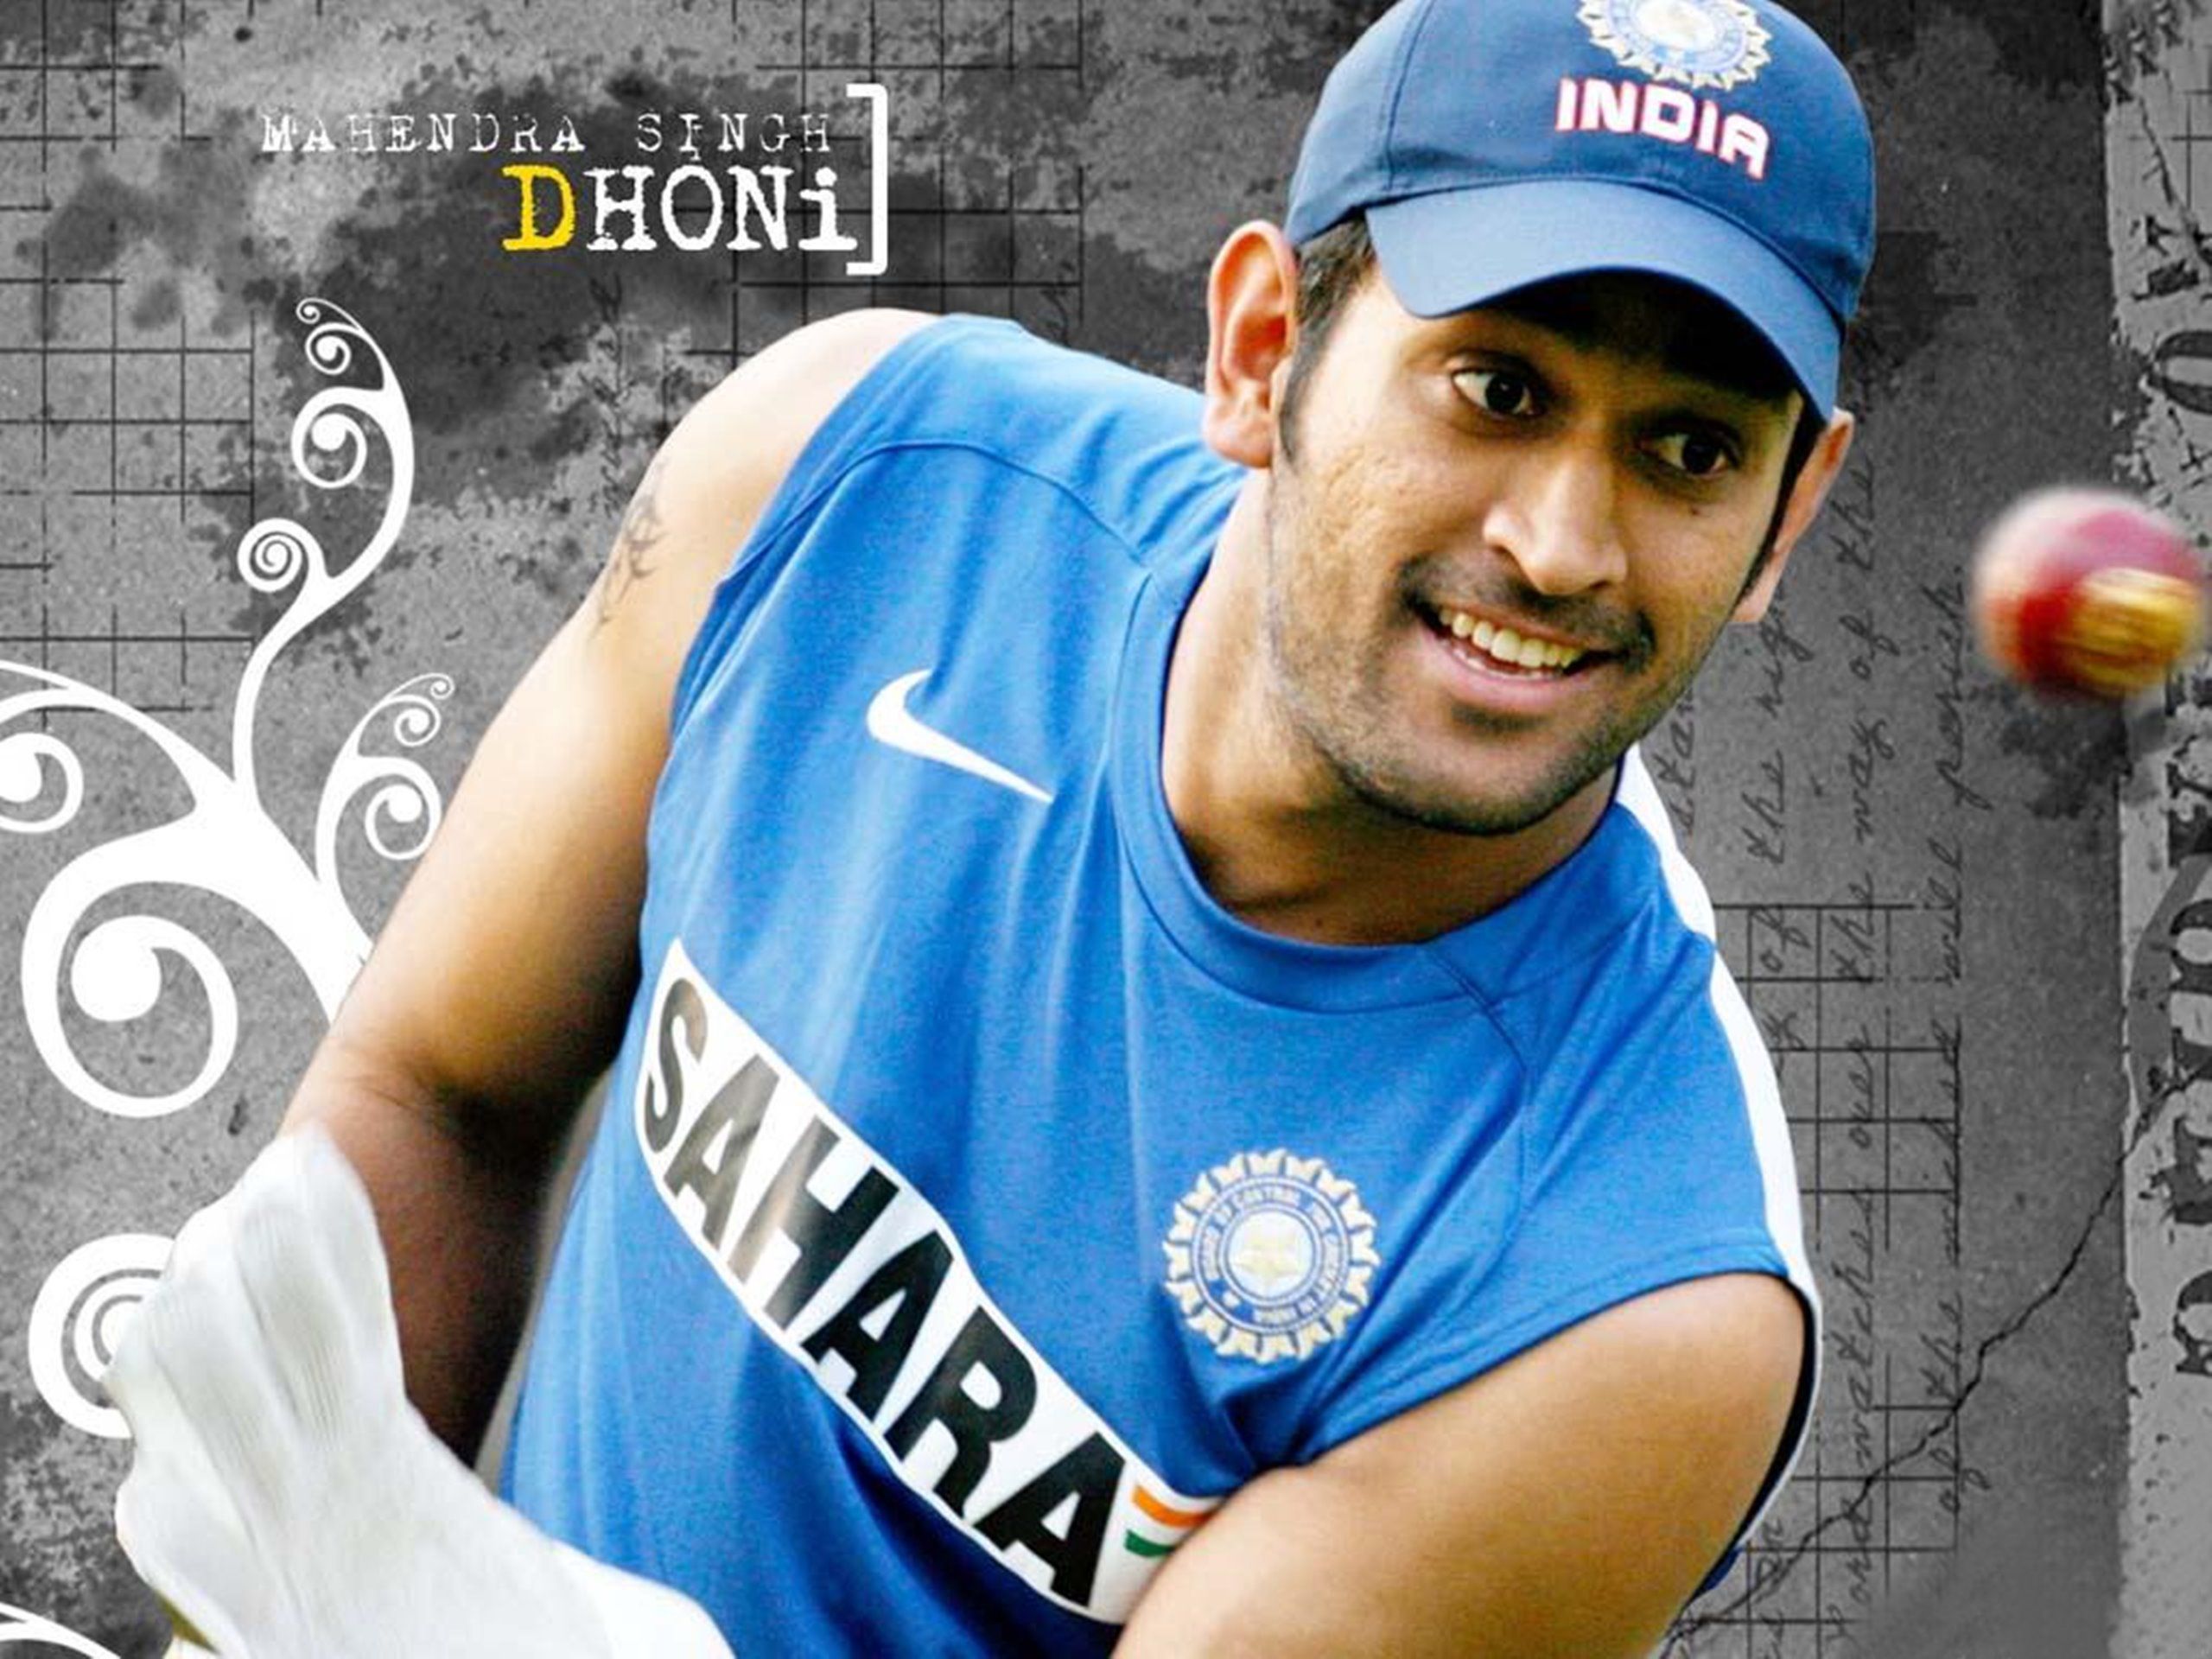 Mahendra Singh Dhoni 1080p HD Wallpapers HD Backgrounds